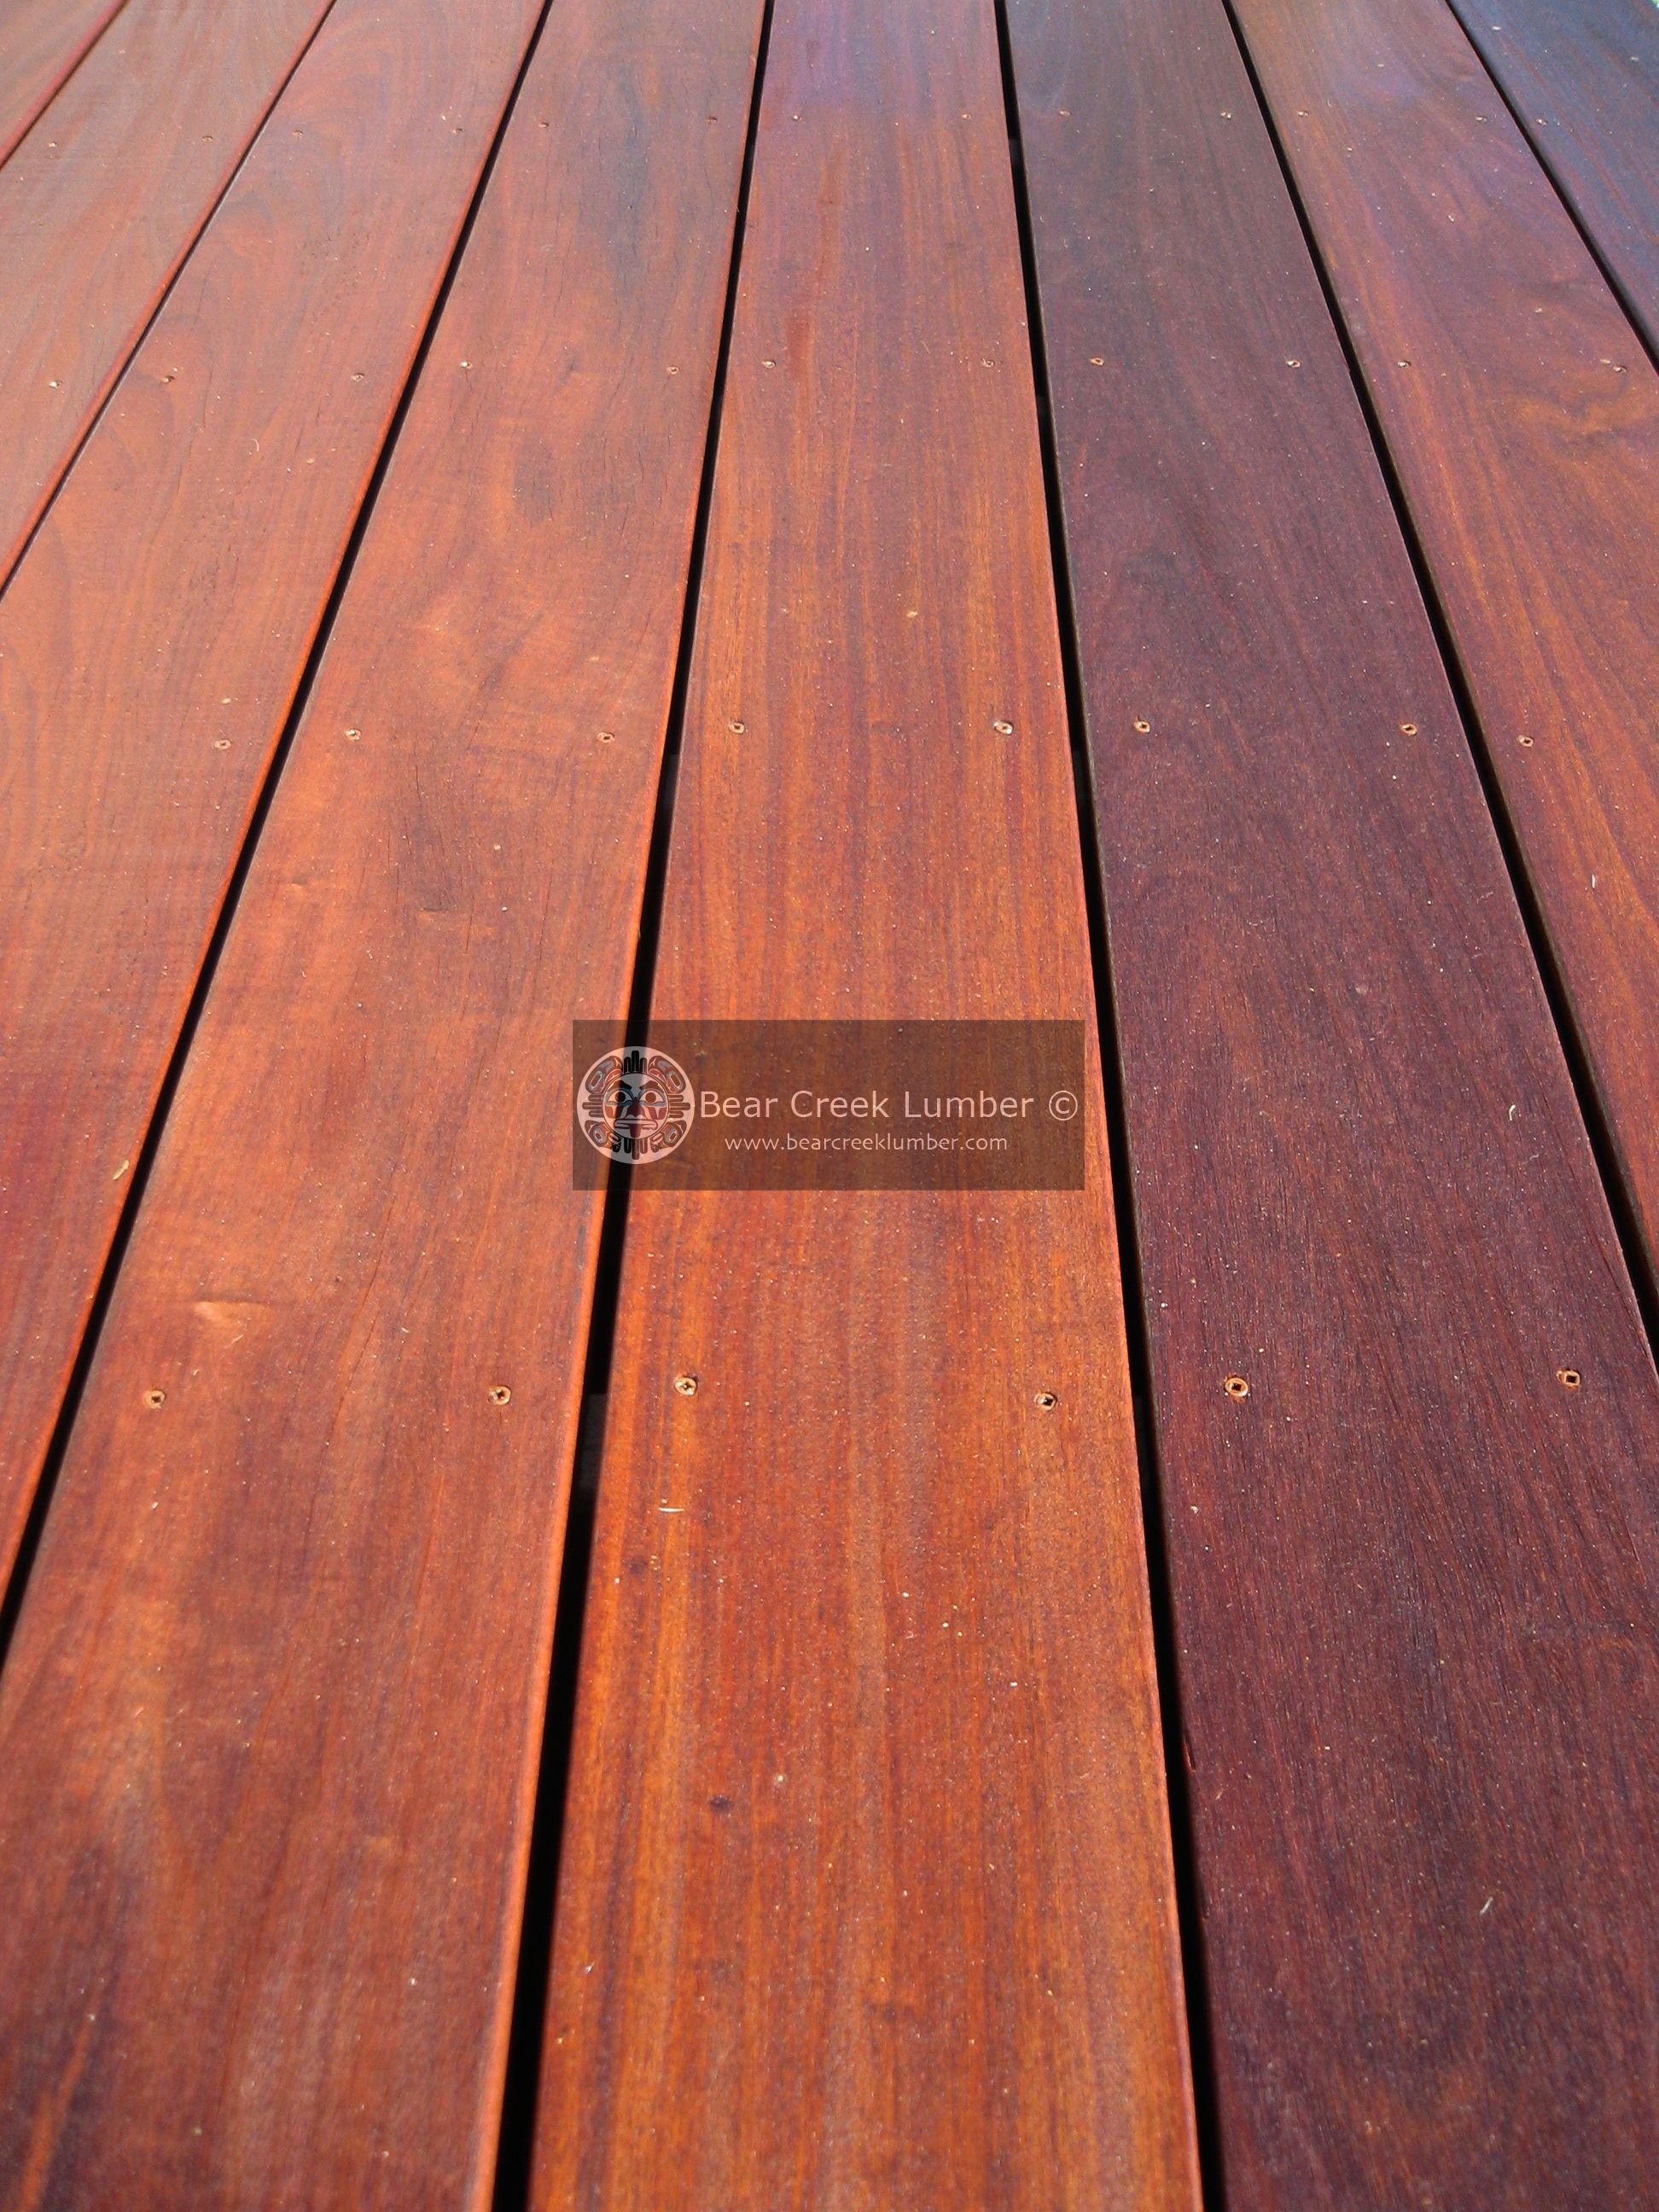 Spacing Between Deck Boards And Spacing For Ipe Deck Boards Decks throughout size 1944 X 2592